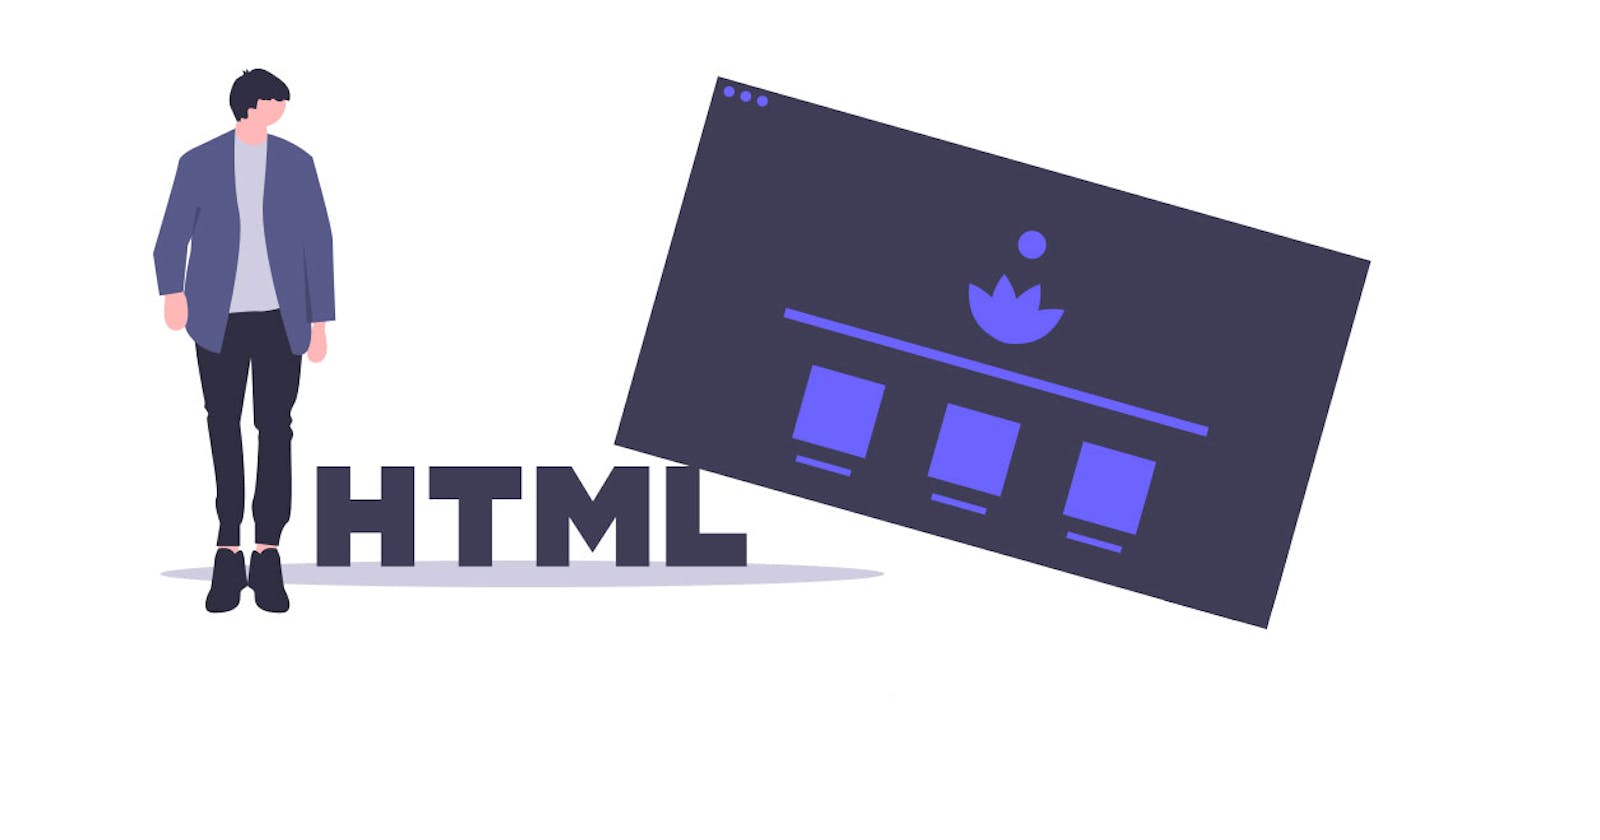 HTML, and why it is a must for every website